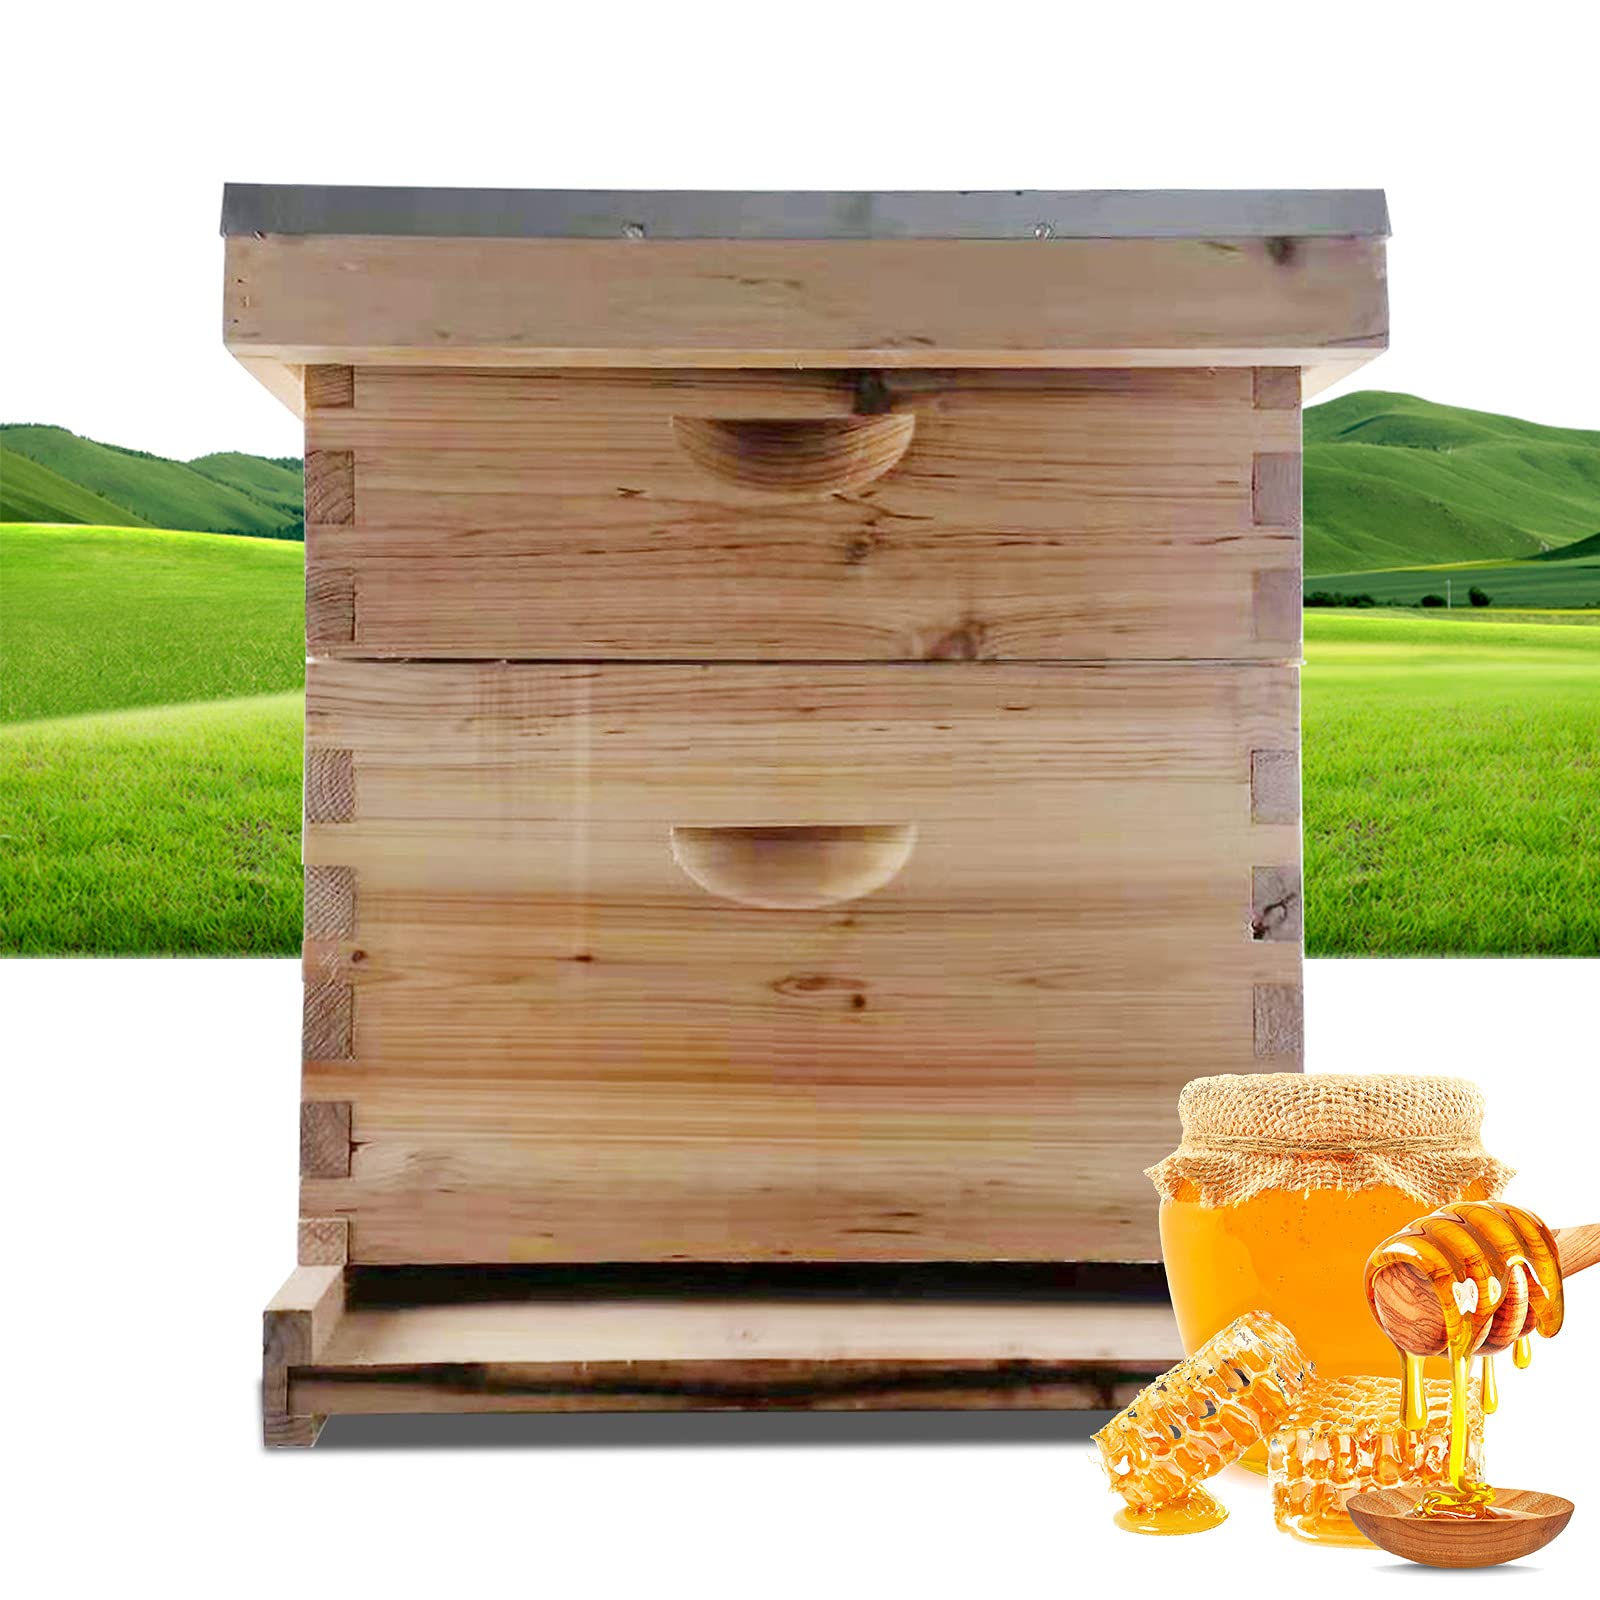 8 Frames Wooden Bee House